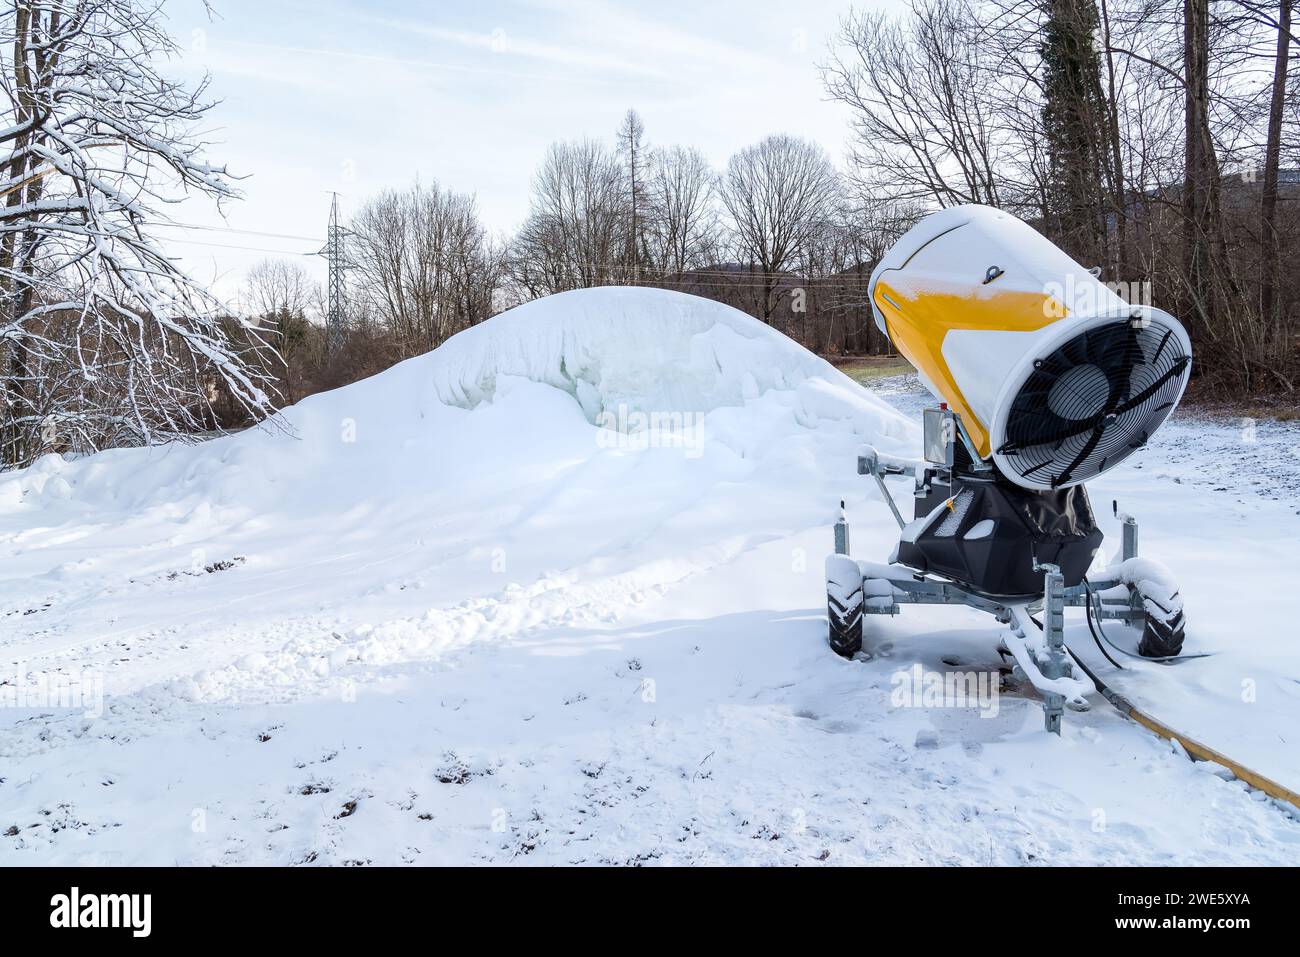 Snow cannon for producing artificial snow for ski slopes. Artificial snow system. Stock Photo